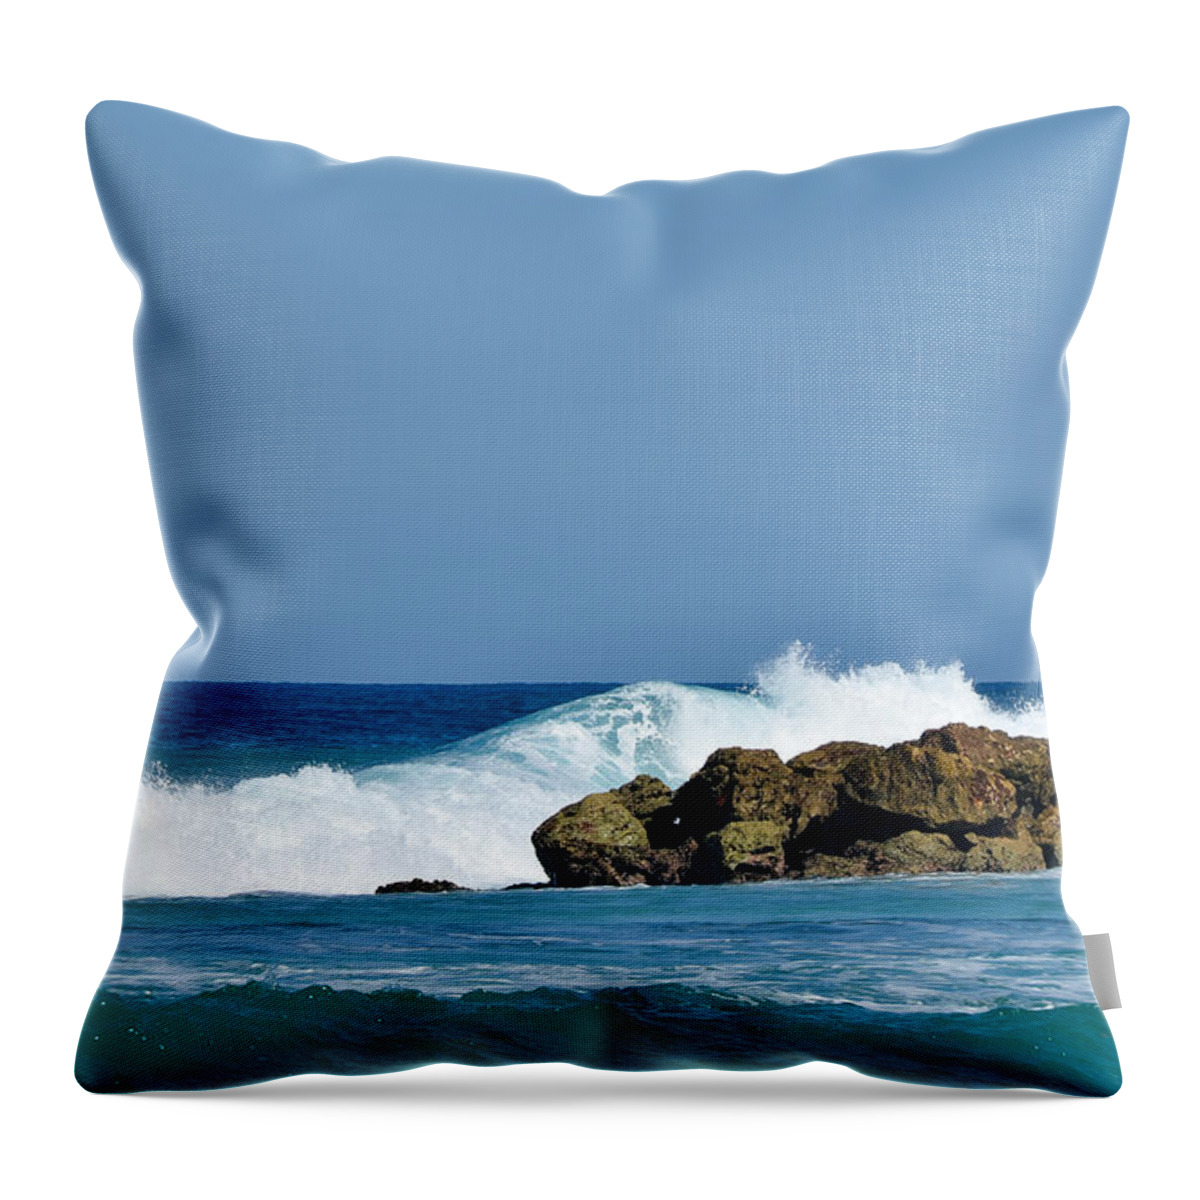 2014 Throw Pillow featuring the photograph Labadee Haiti Ocean Waves by RobLew Photography